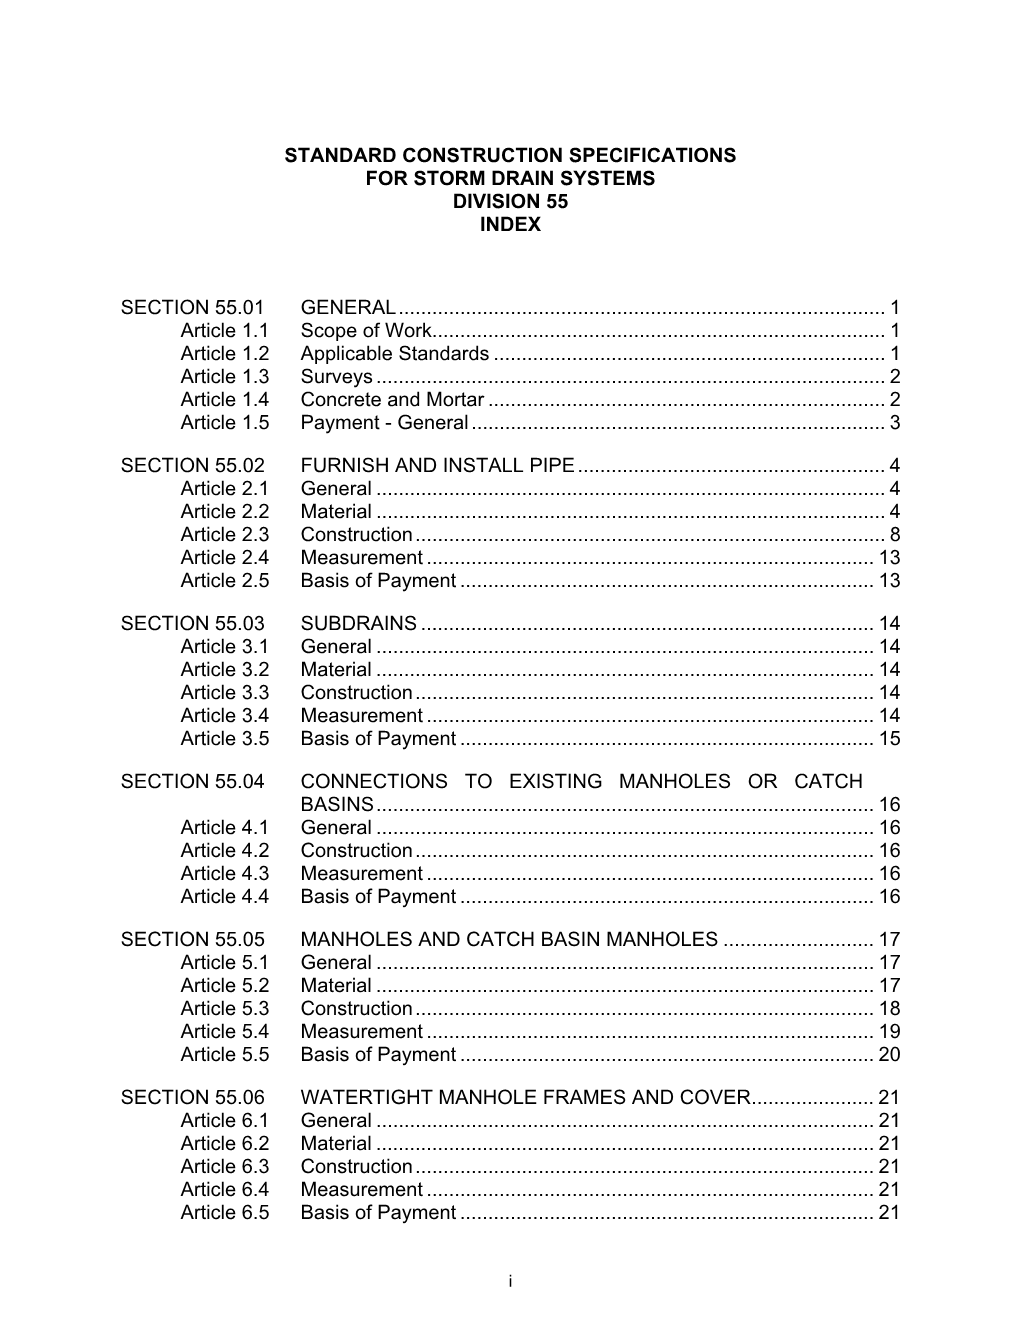 Standard Construction Specifications for Storm Drain Systems Division 55 Index